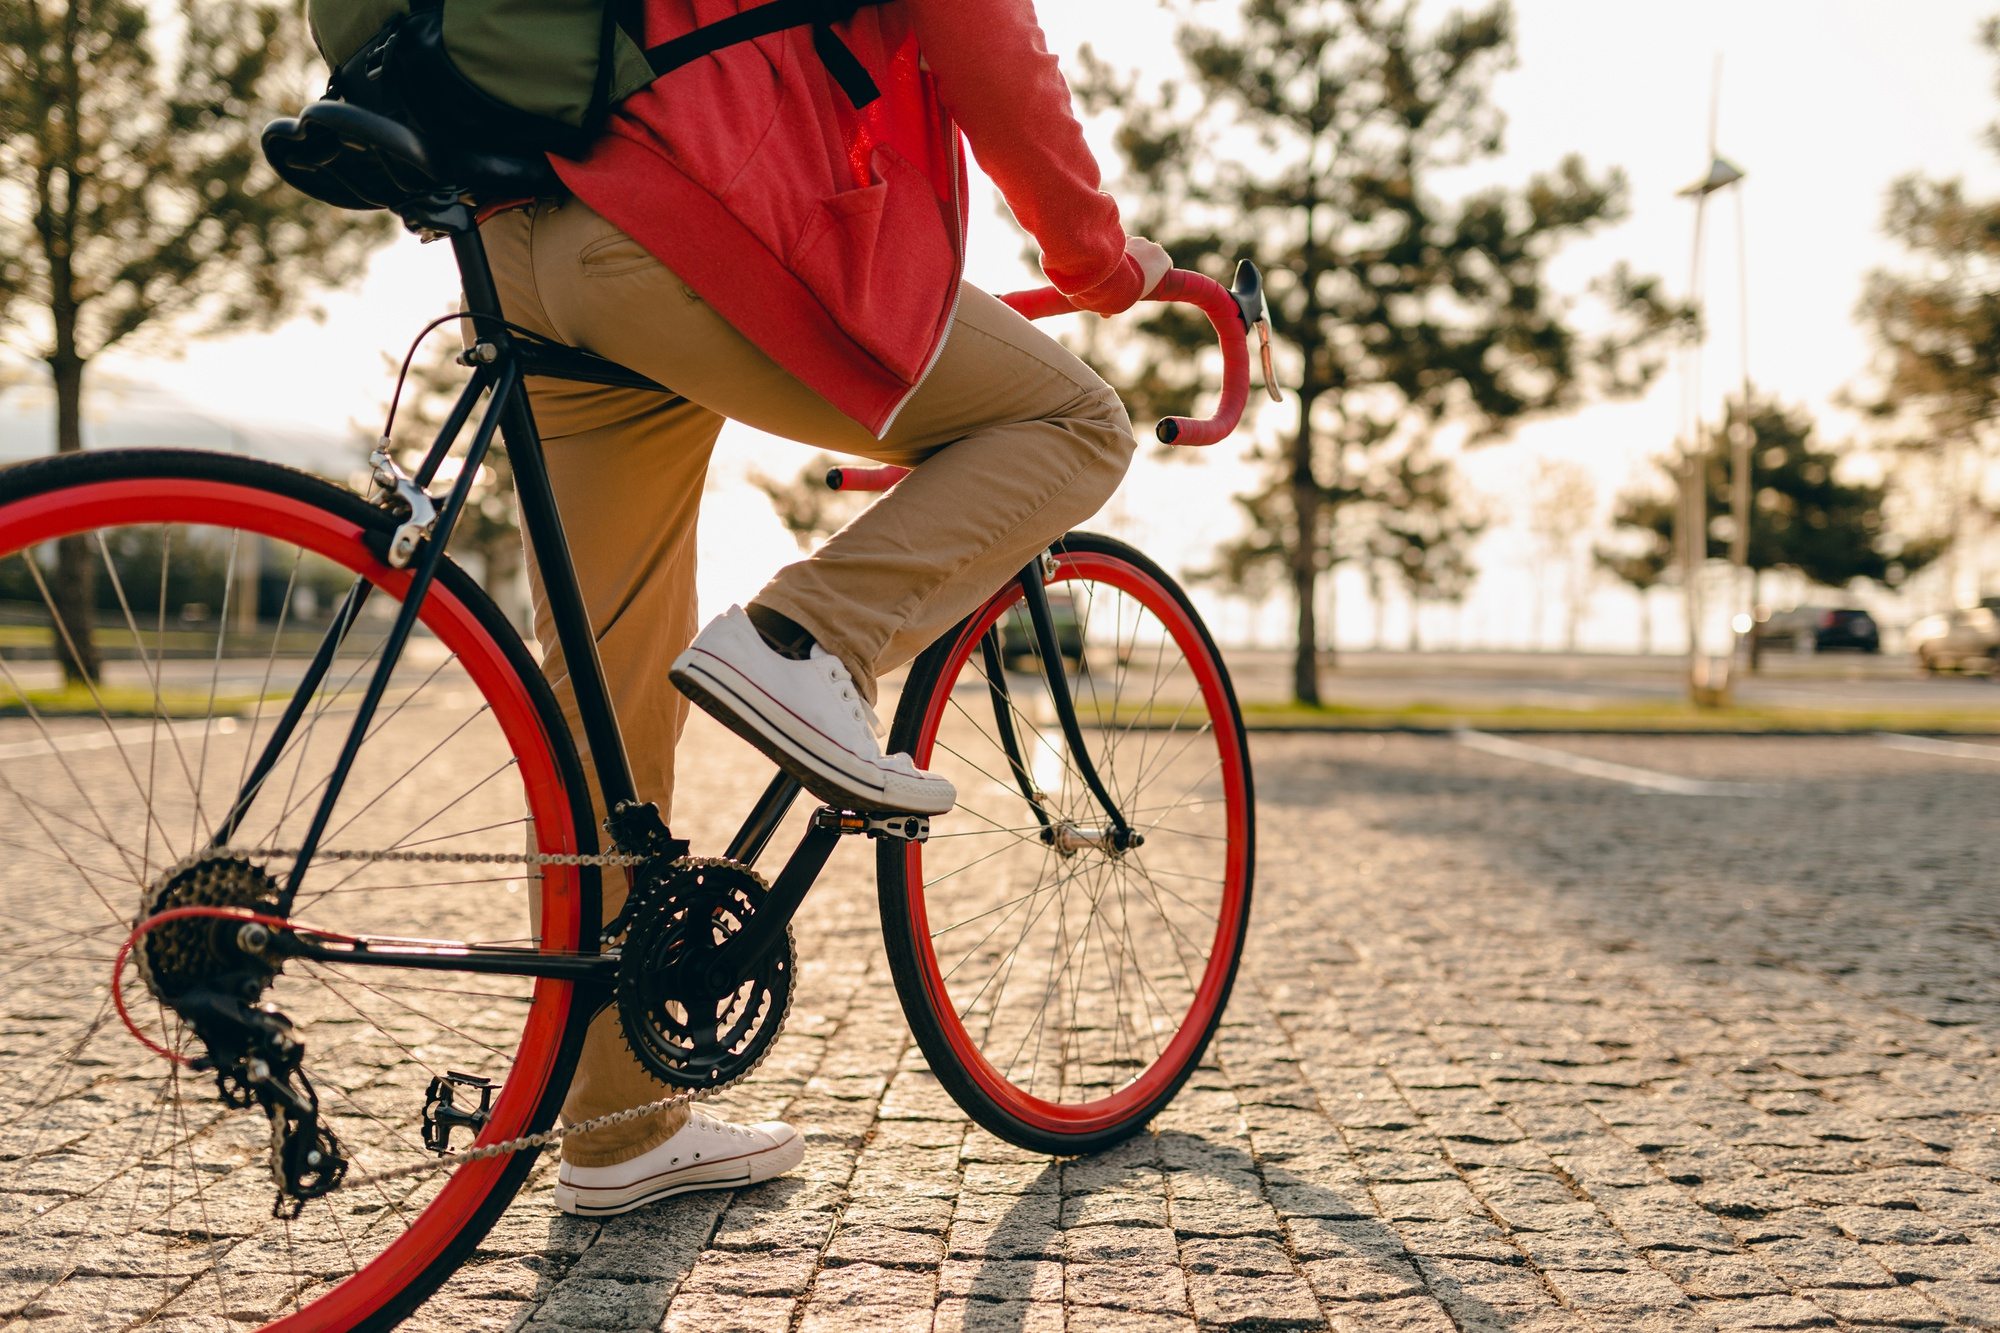 close-up-legs-sneakers-hands-steering-wheel-hipster-style-bearded-man-red-hoodie-beige-trousers-riding-alone-with-backpack-bicycle-healthy-active-lifestyle-traveler-backpacker